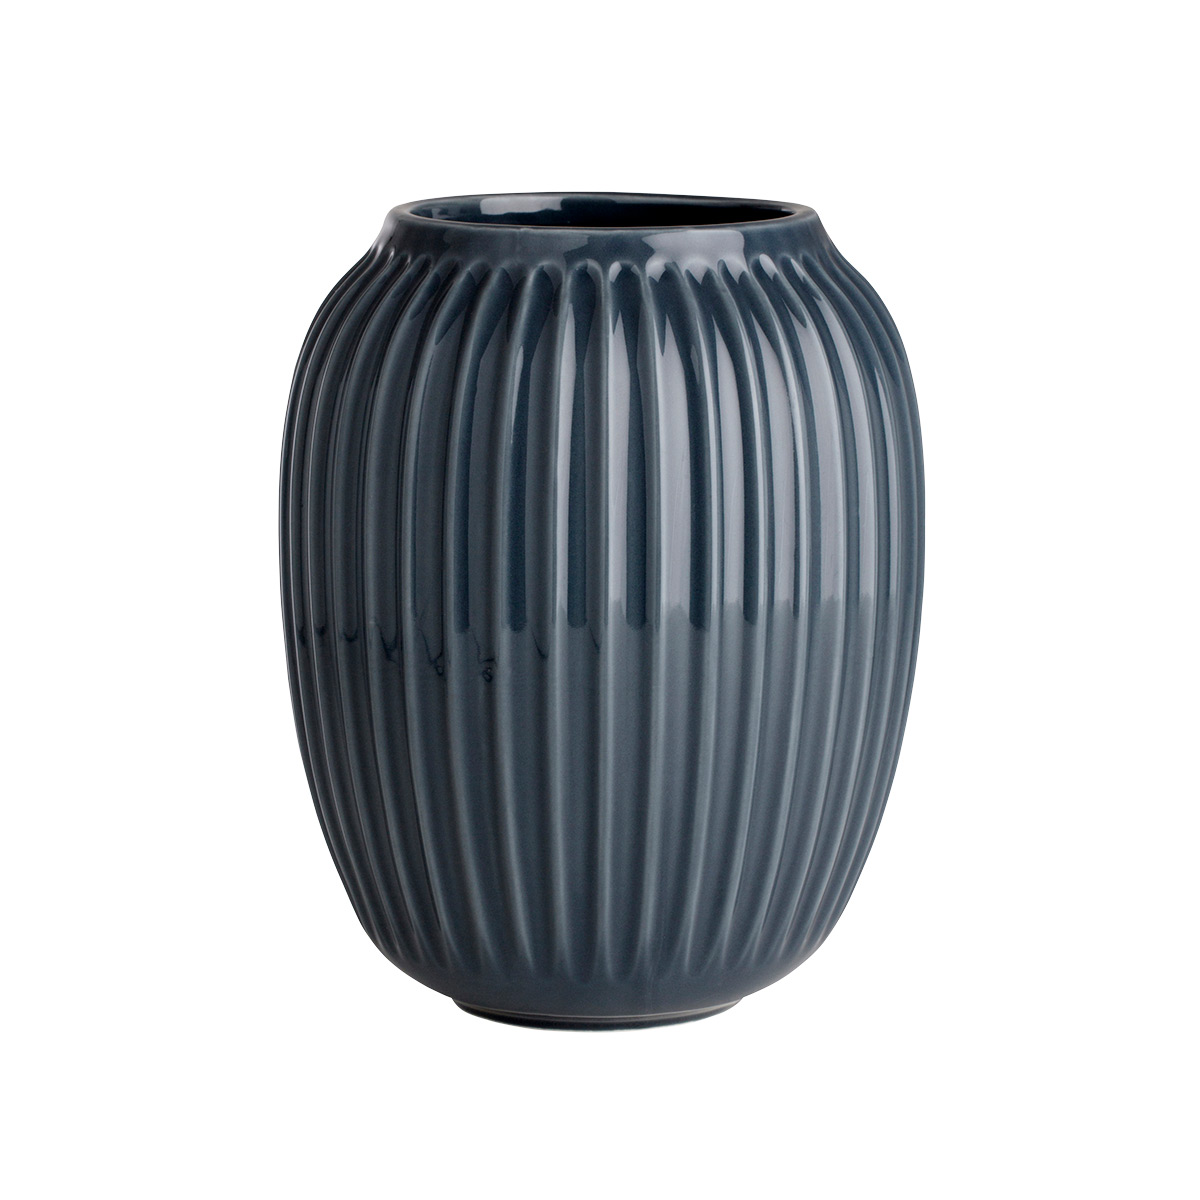 Kahler Hammershoi Vase | The Container Store